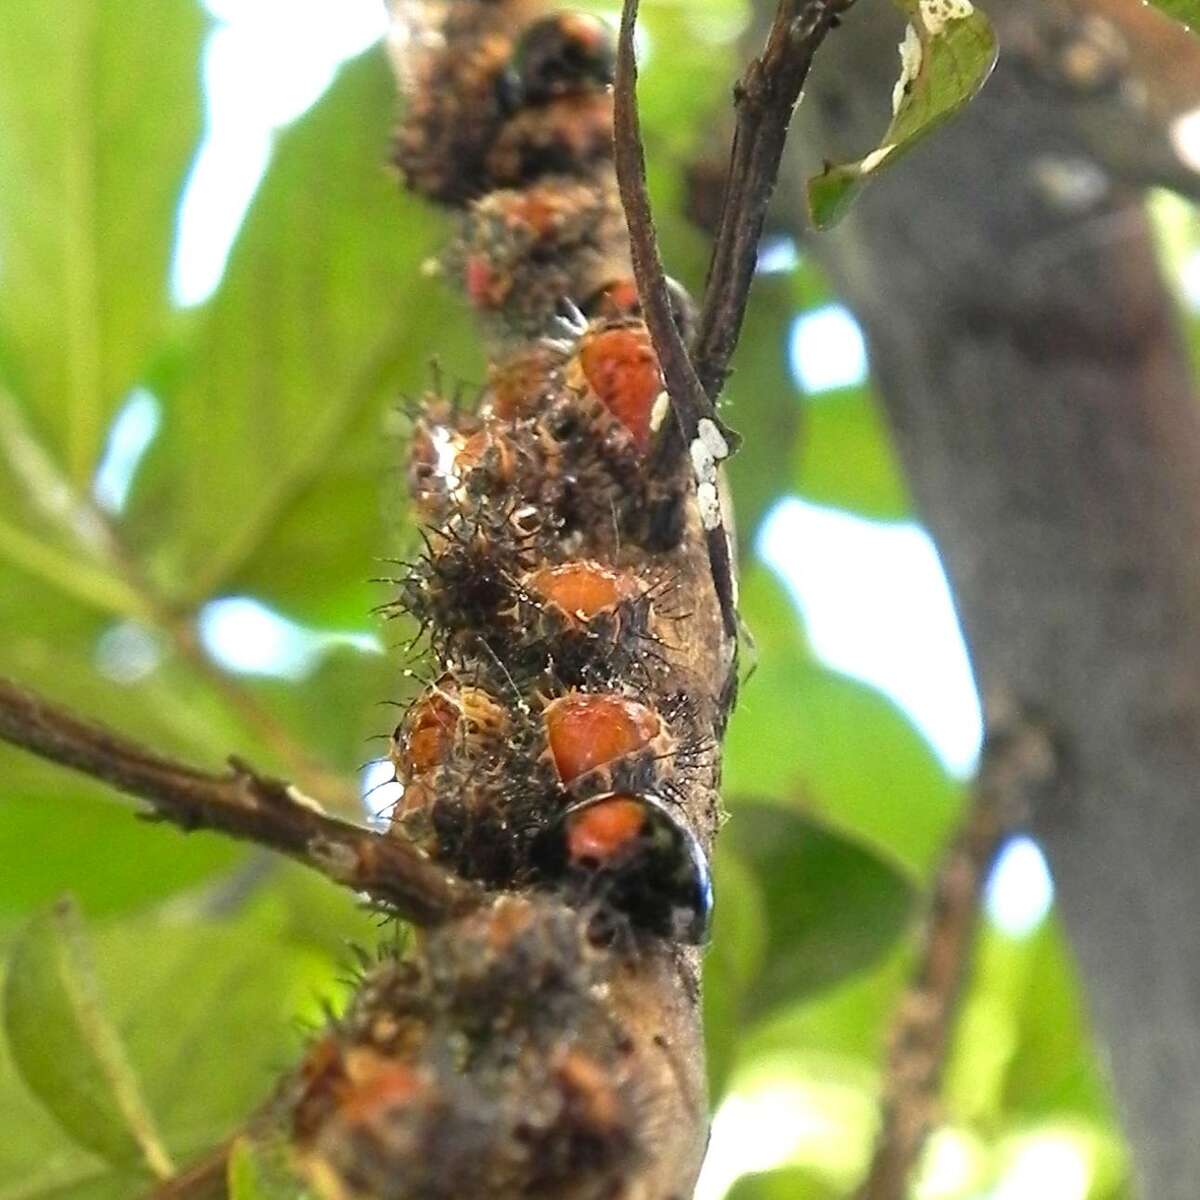 The immature form of the ladybugs (“nymphs”) are odd-looking insects that don’t resemble the adults at all. Do not apply any insecticide if you see them.